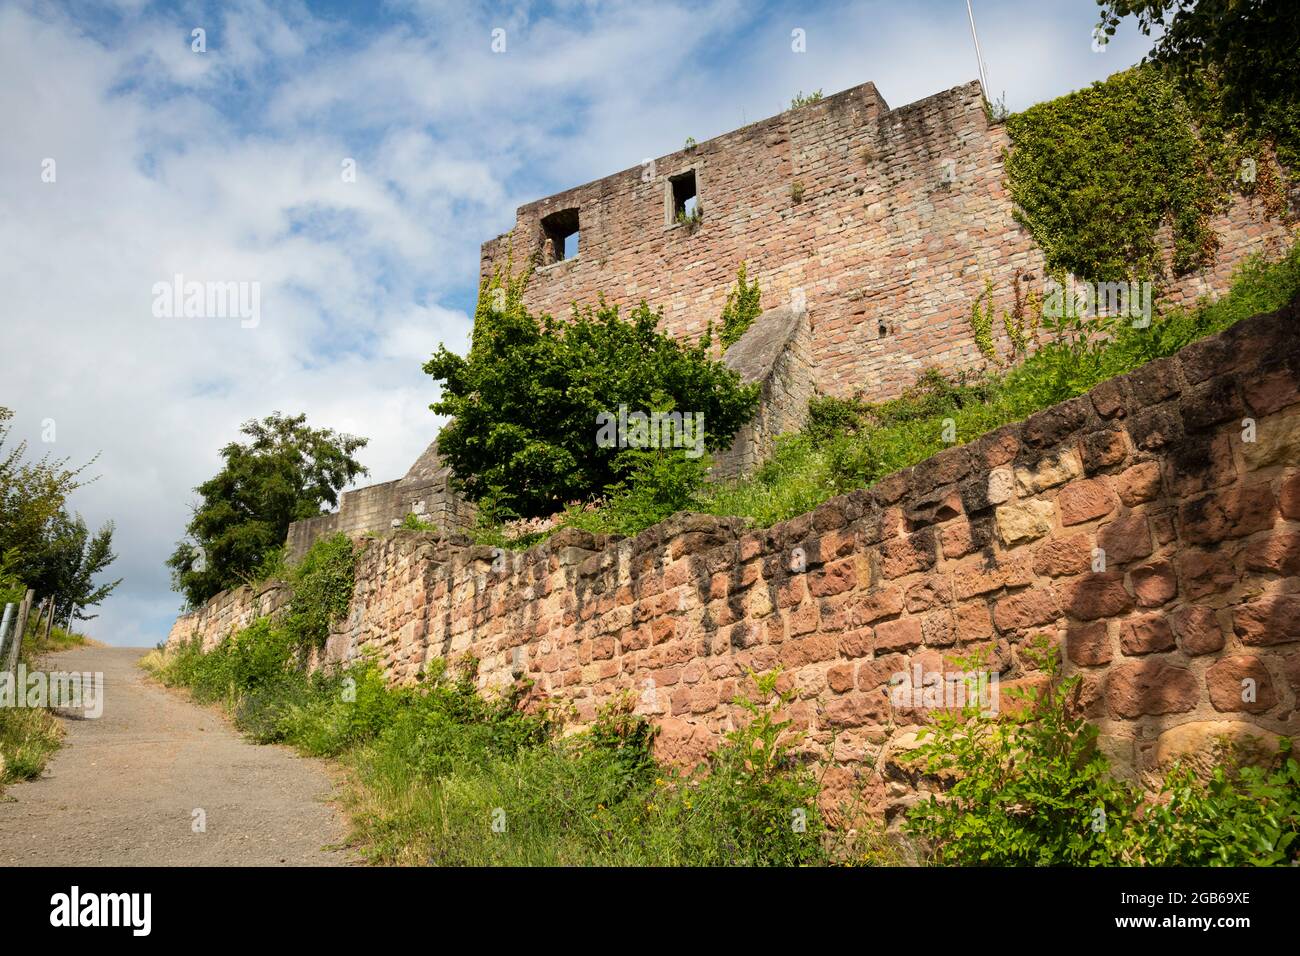 geography / travel, Germany, Rhineland-Palatinate, new town at the Wine Route, Wolfsburg, castle ruin, ADDITIONAL-RIGHTS-CLEARANCE-INFO-NOT-AVAILABLE Stock Photo